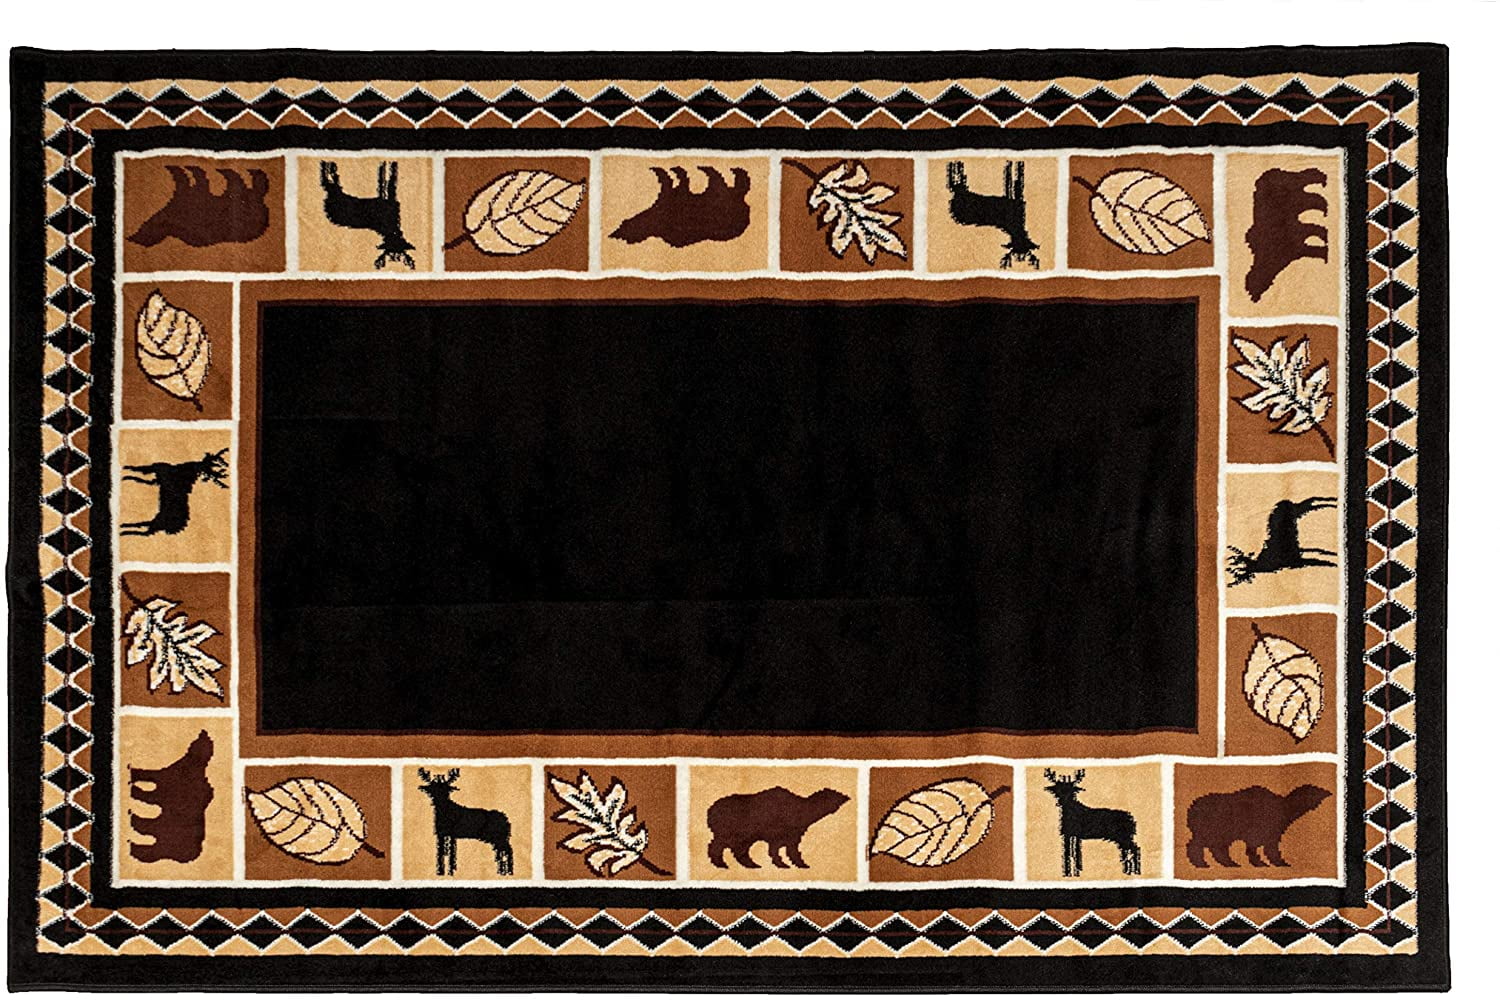 New Rustic Cabin Lodge Red Black Buffalo Check BEAR WELCOME MAT Floor Rug 